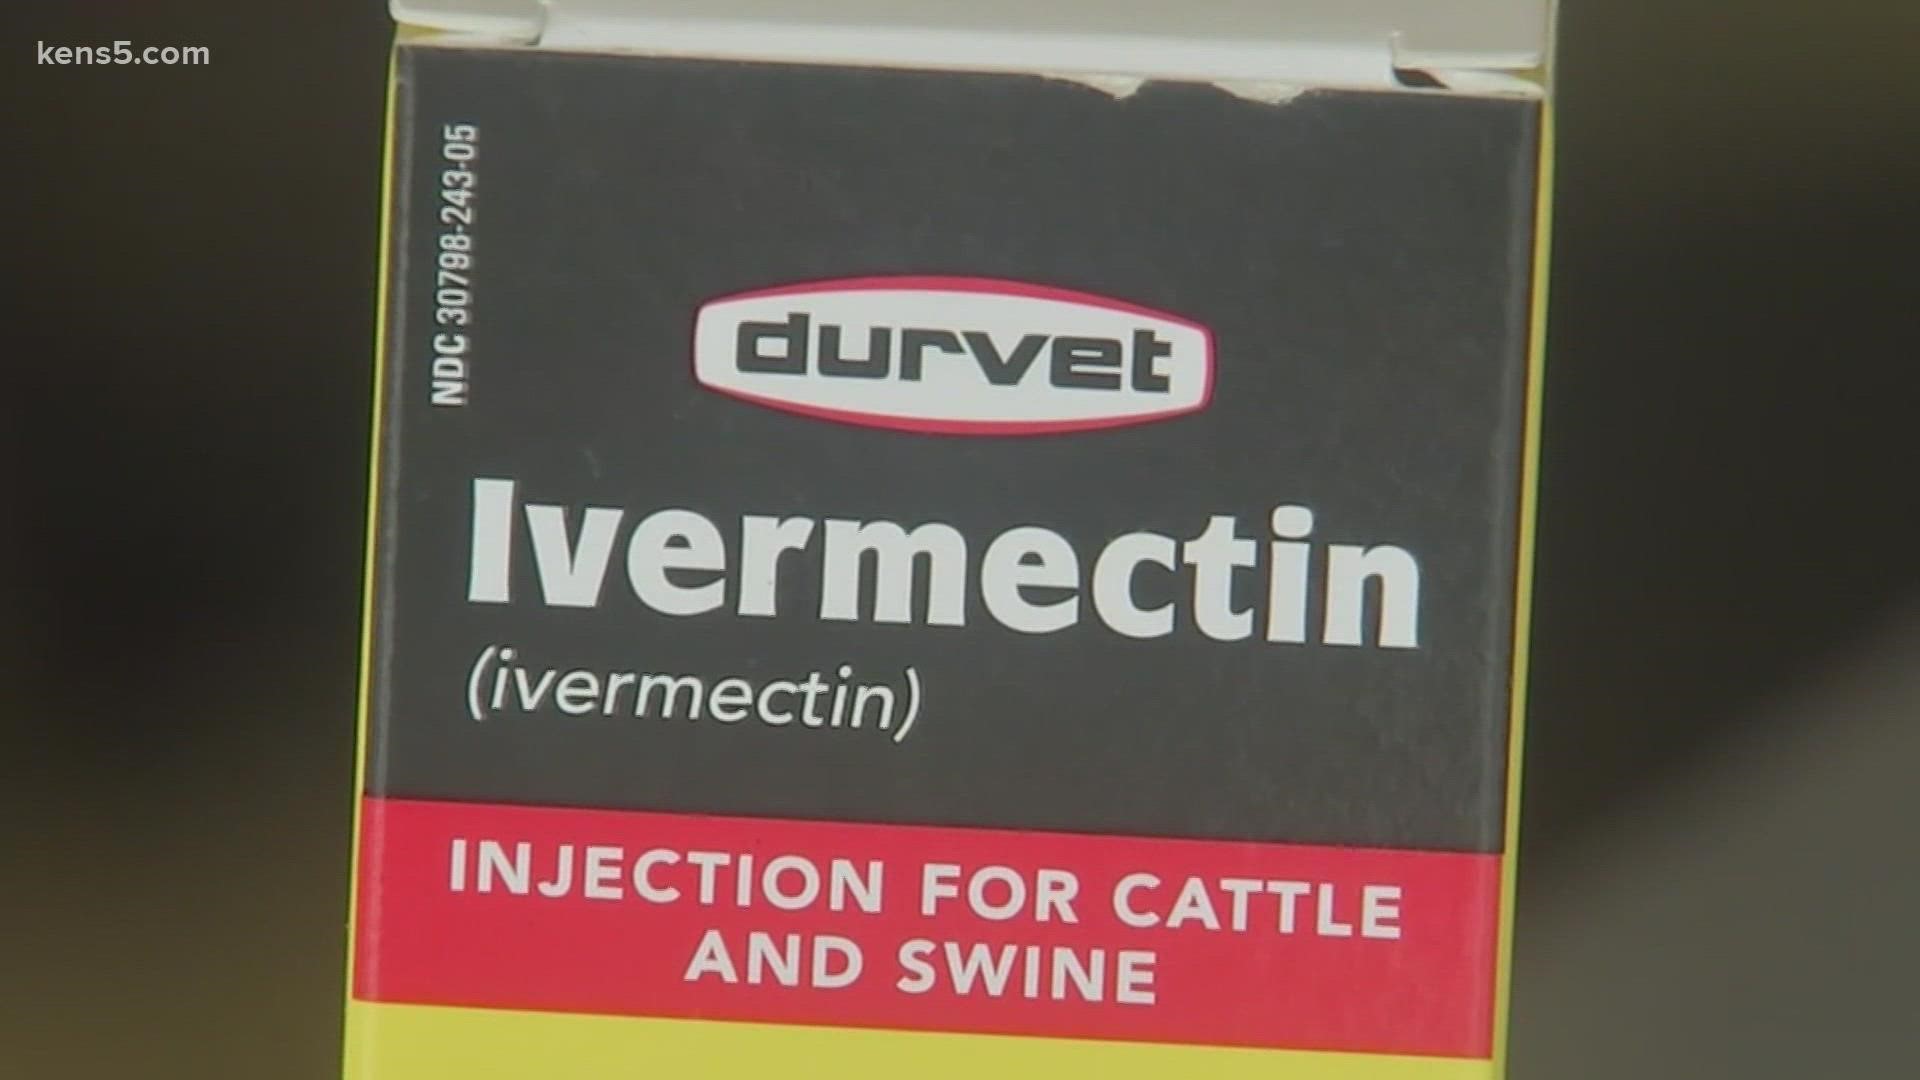 Joe Rogan said in an Instagram video he used Ivermectin, a deworming agent used by vets, to treat his COVID.